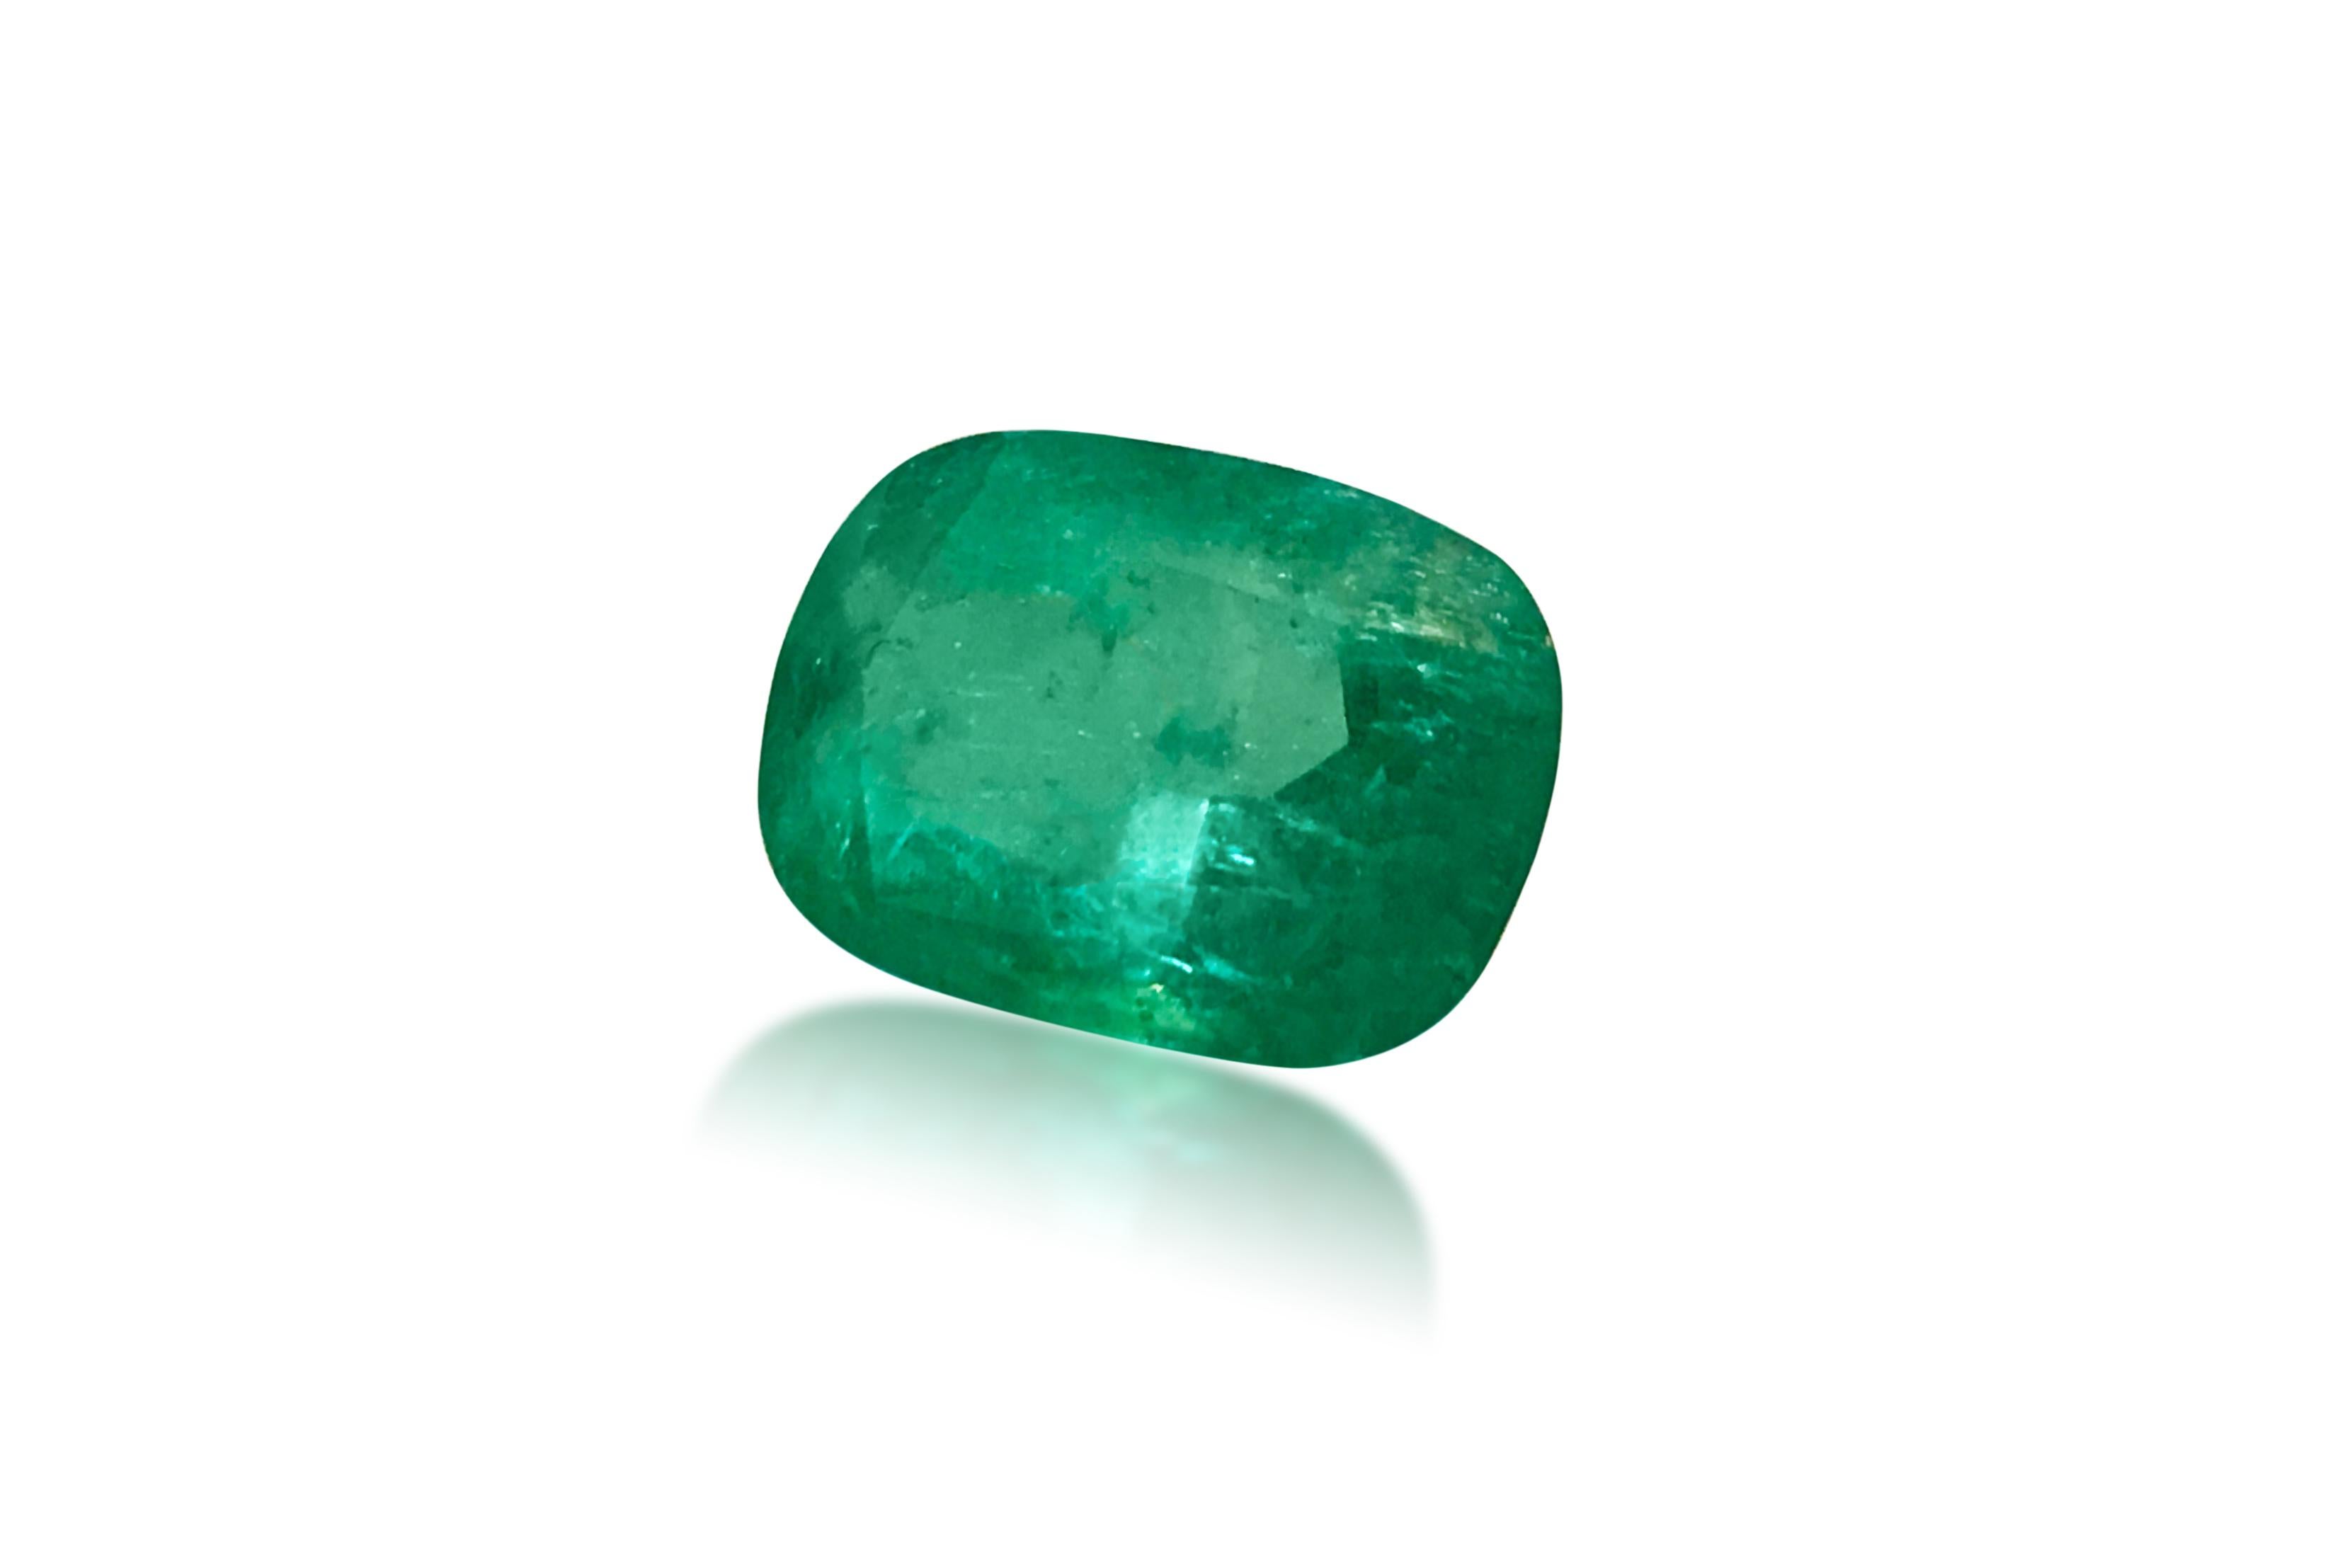 Presenting this superb loose emerald, boasting a remarkable weight of 15.50 carats and measuring 3.40 x 8.80 mm. Its deep color and shine, along with its strong green hue, make it a standout gemstone. This 100% natural earth-mined Colombian emerald